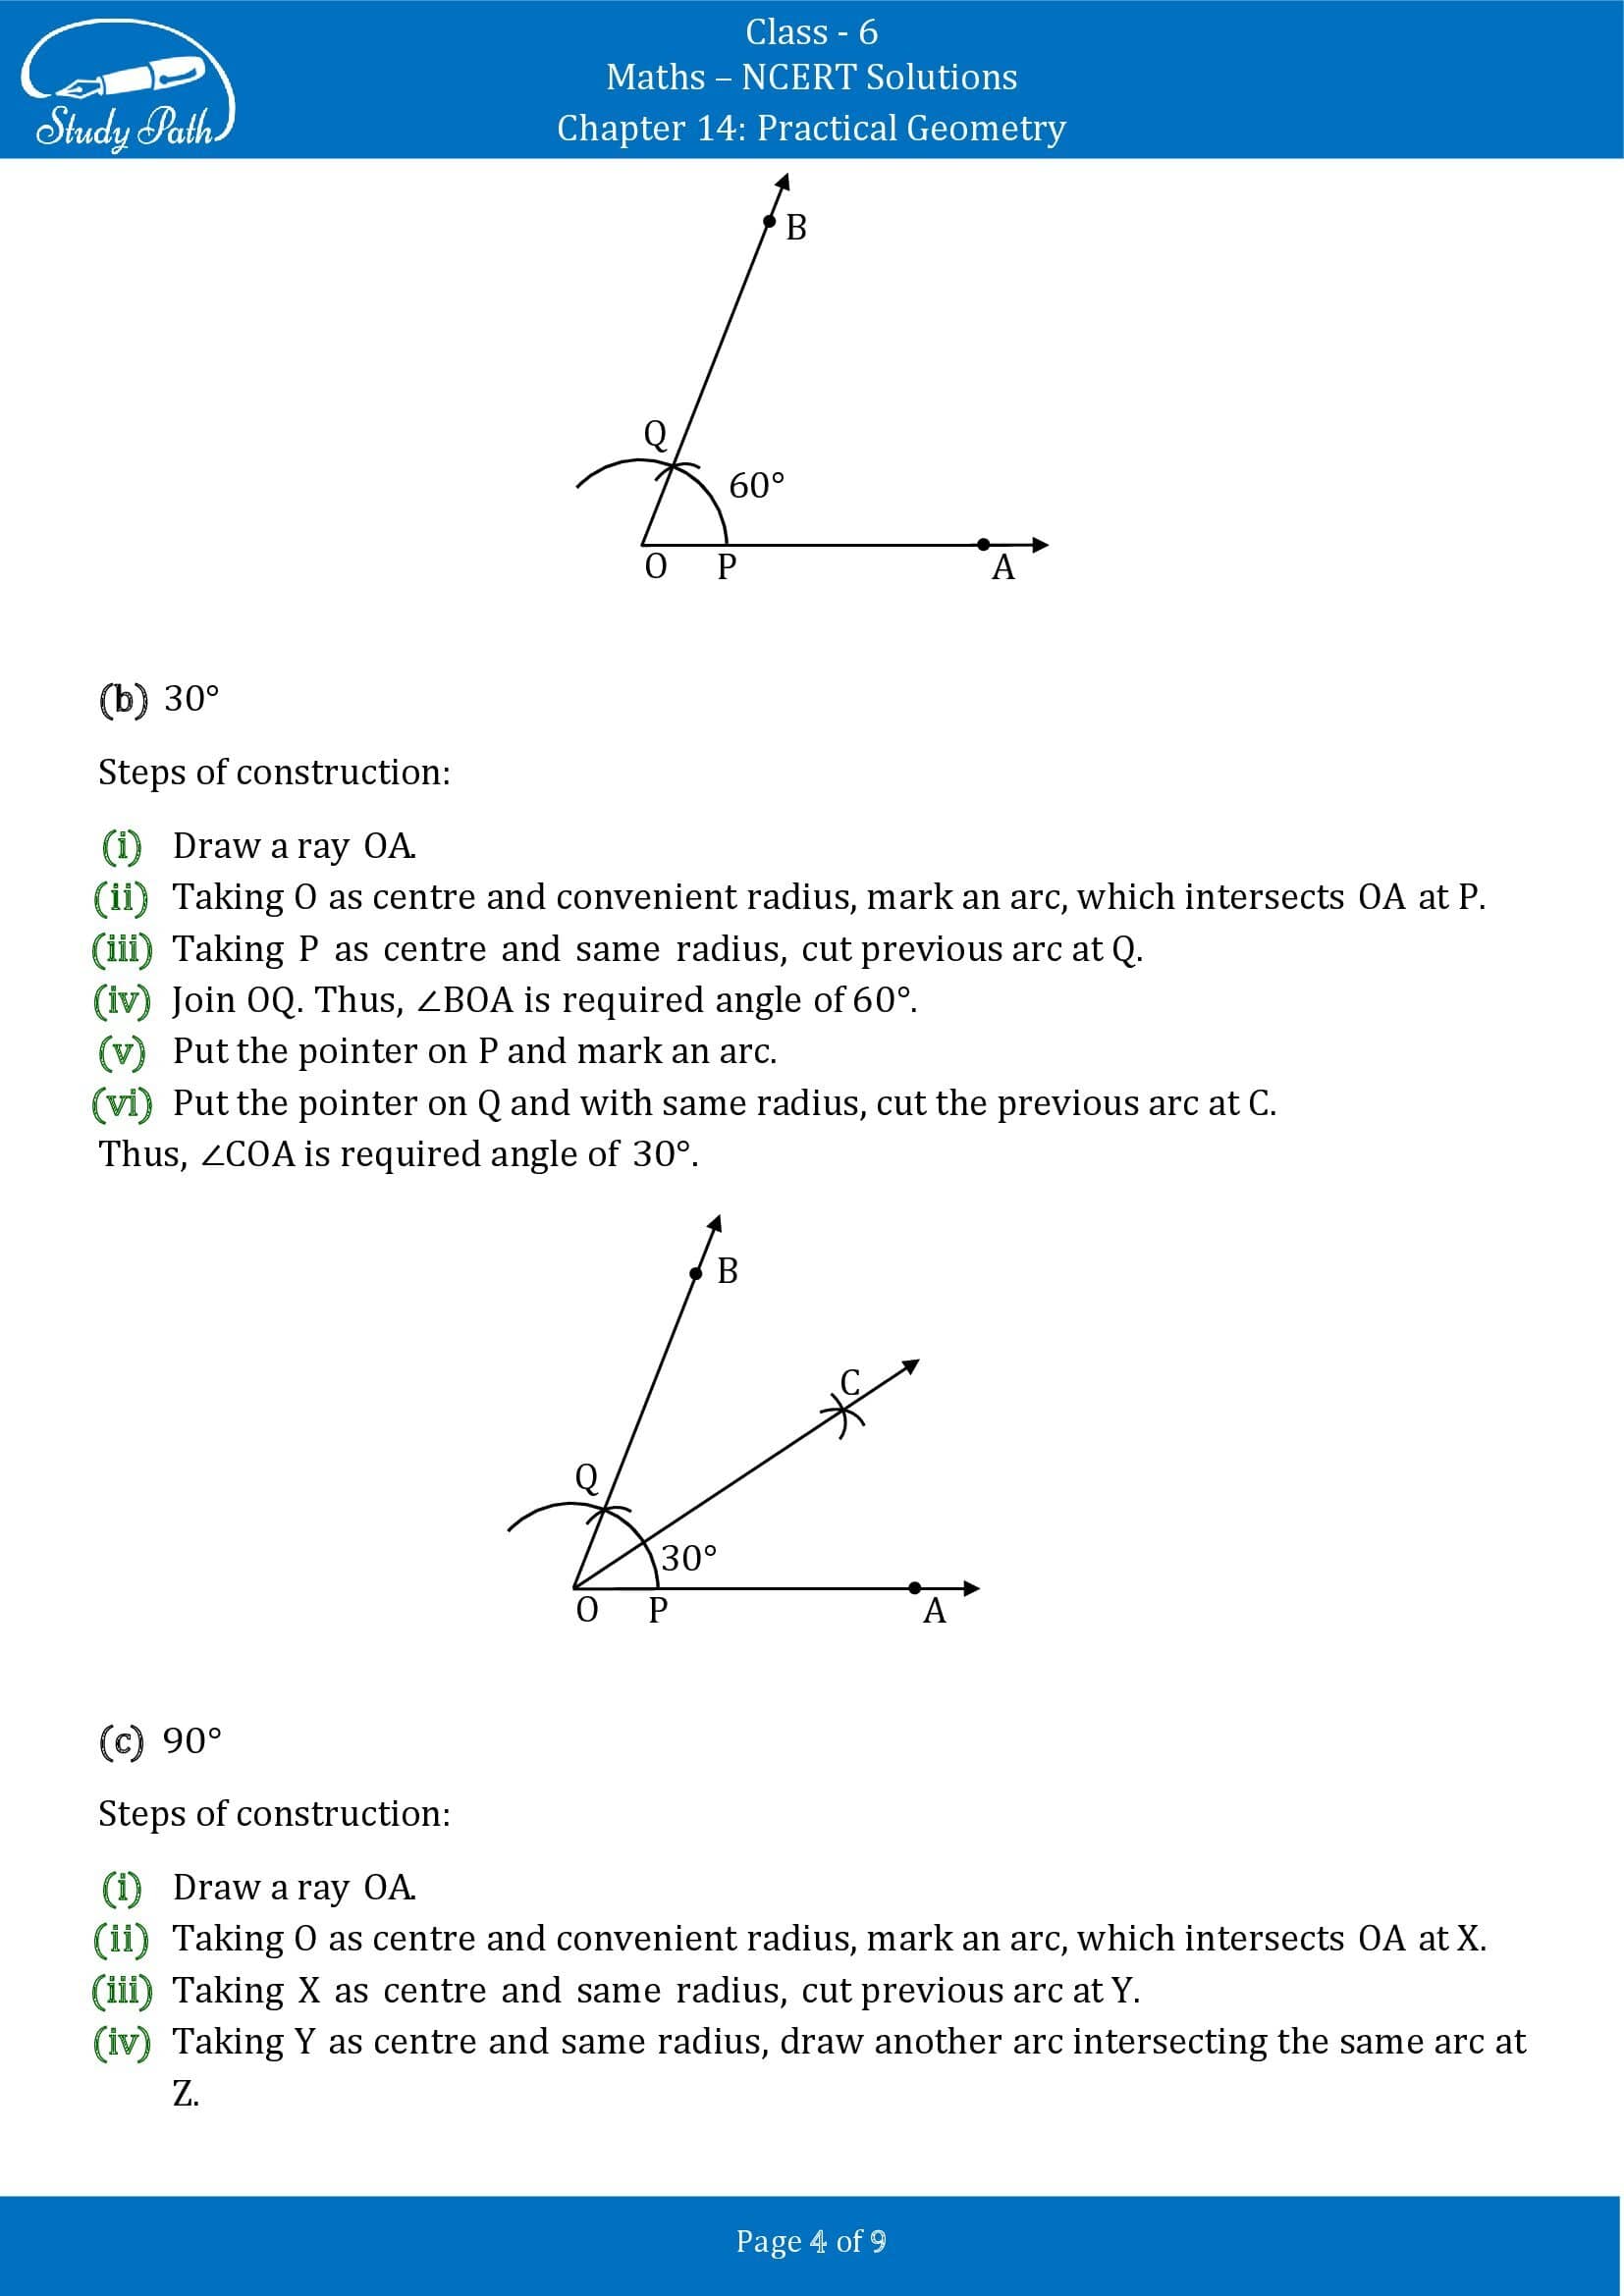 NCERT Solutions for Class 6 Maths Chapter 14 Practical Geometry Exercise 14.6 00004